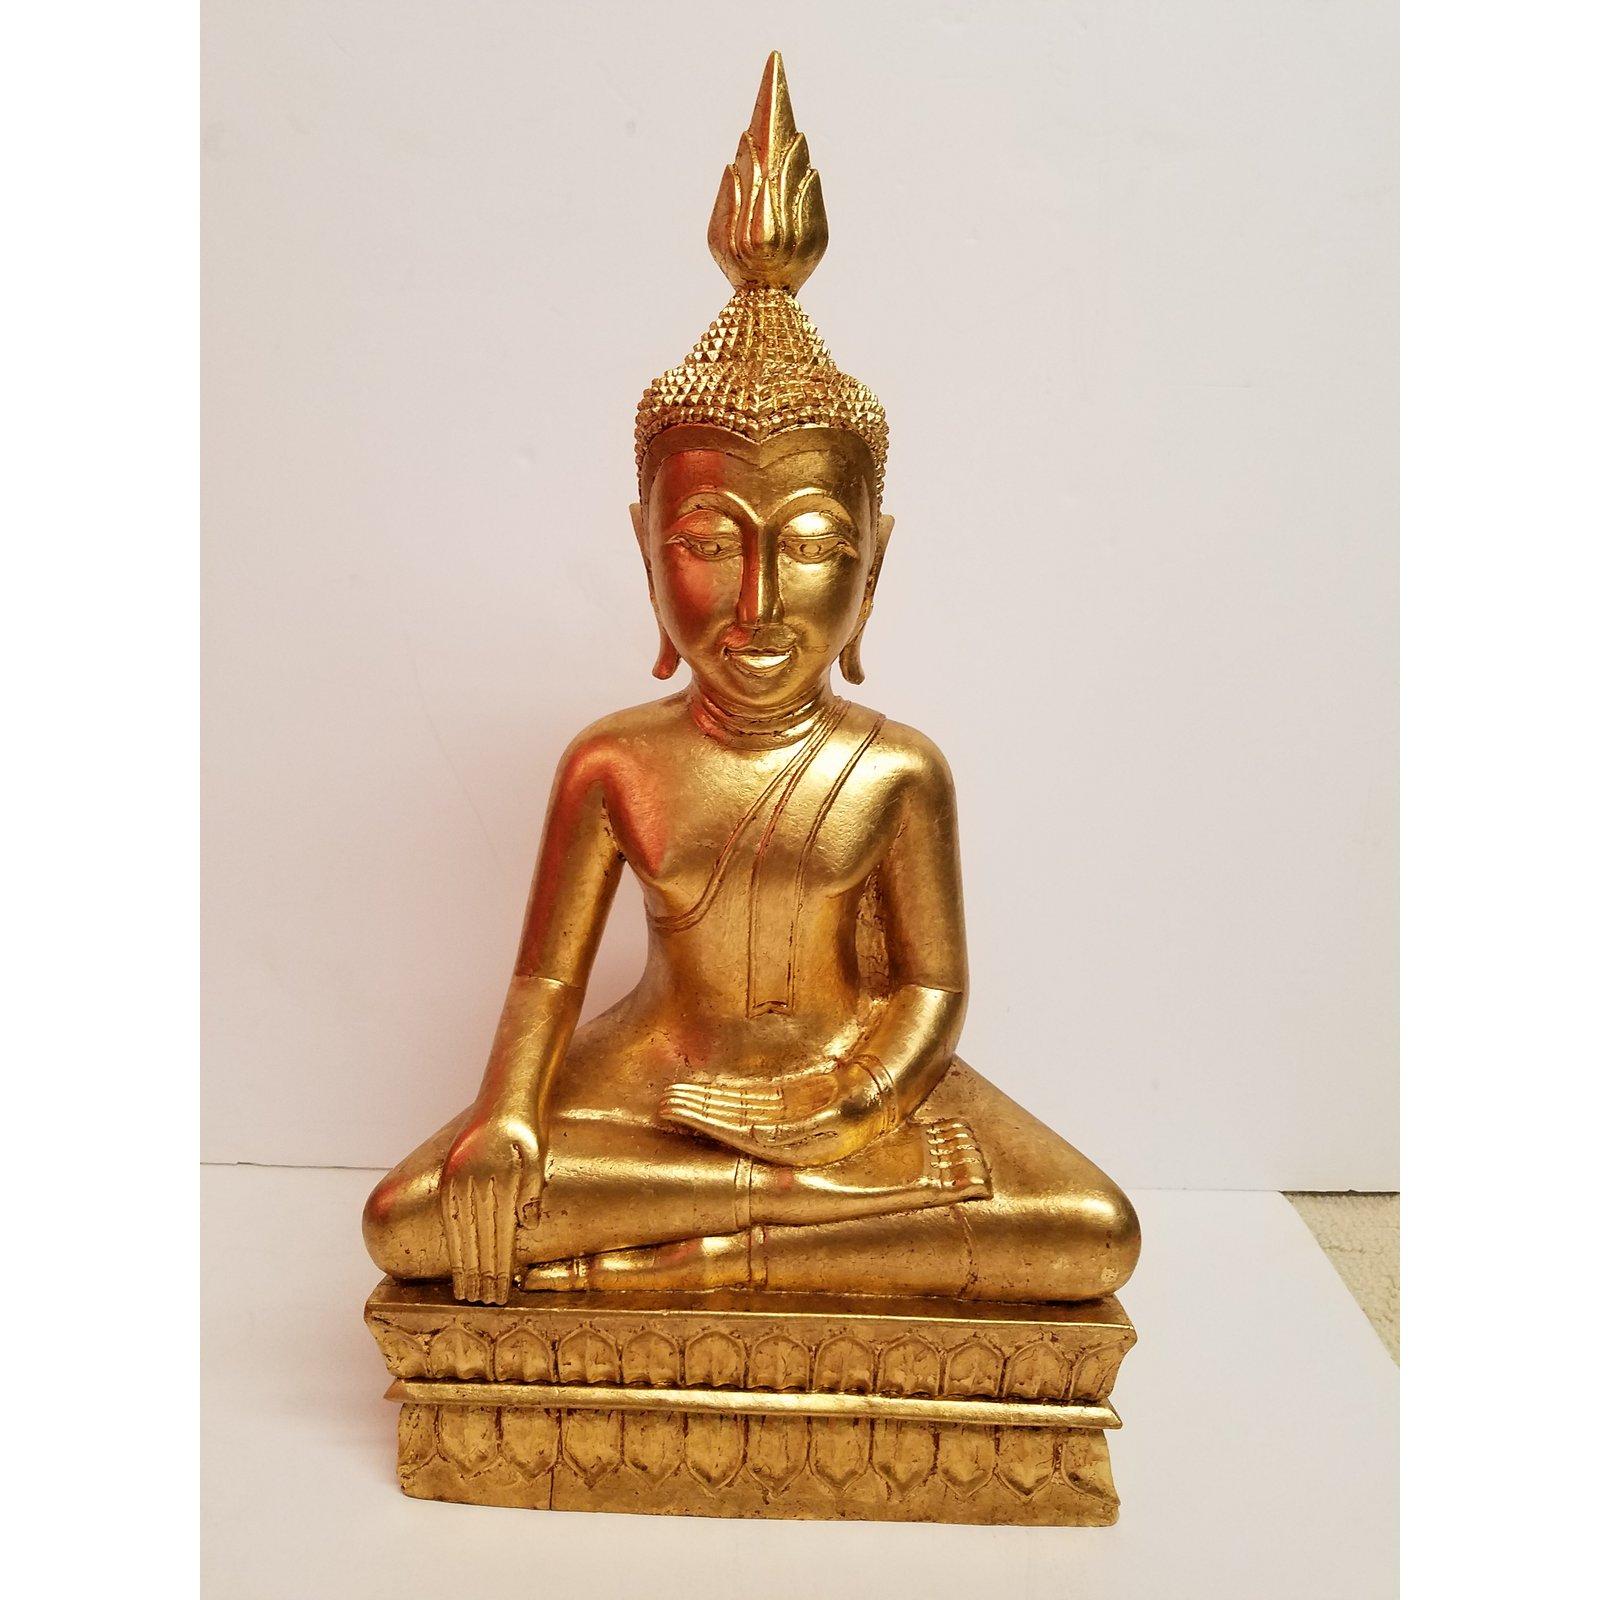 Beautiful giltwood hand carved seated Buddha, Thailand, 1960s. Medium size and excellent for a tabletop or display on a chest or credenza. Warm gilt finish is very good condition.